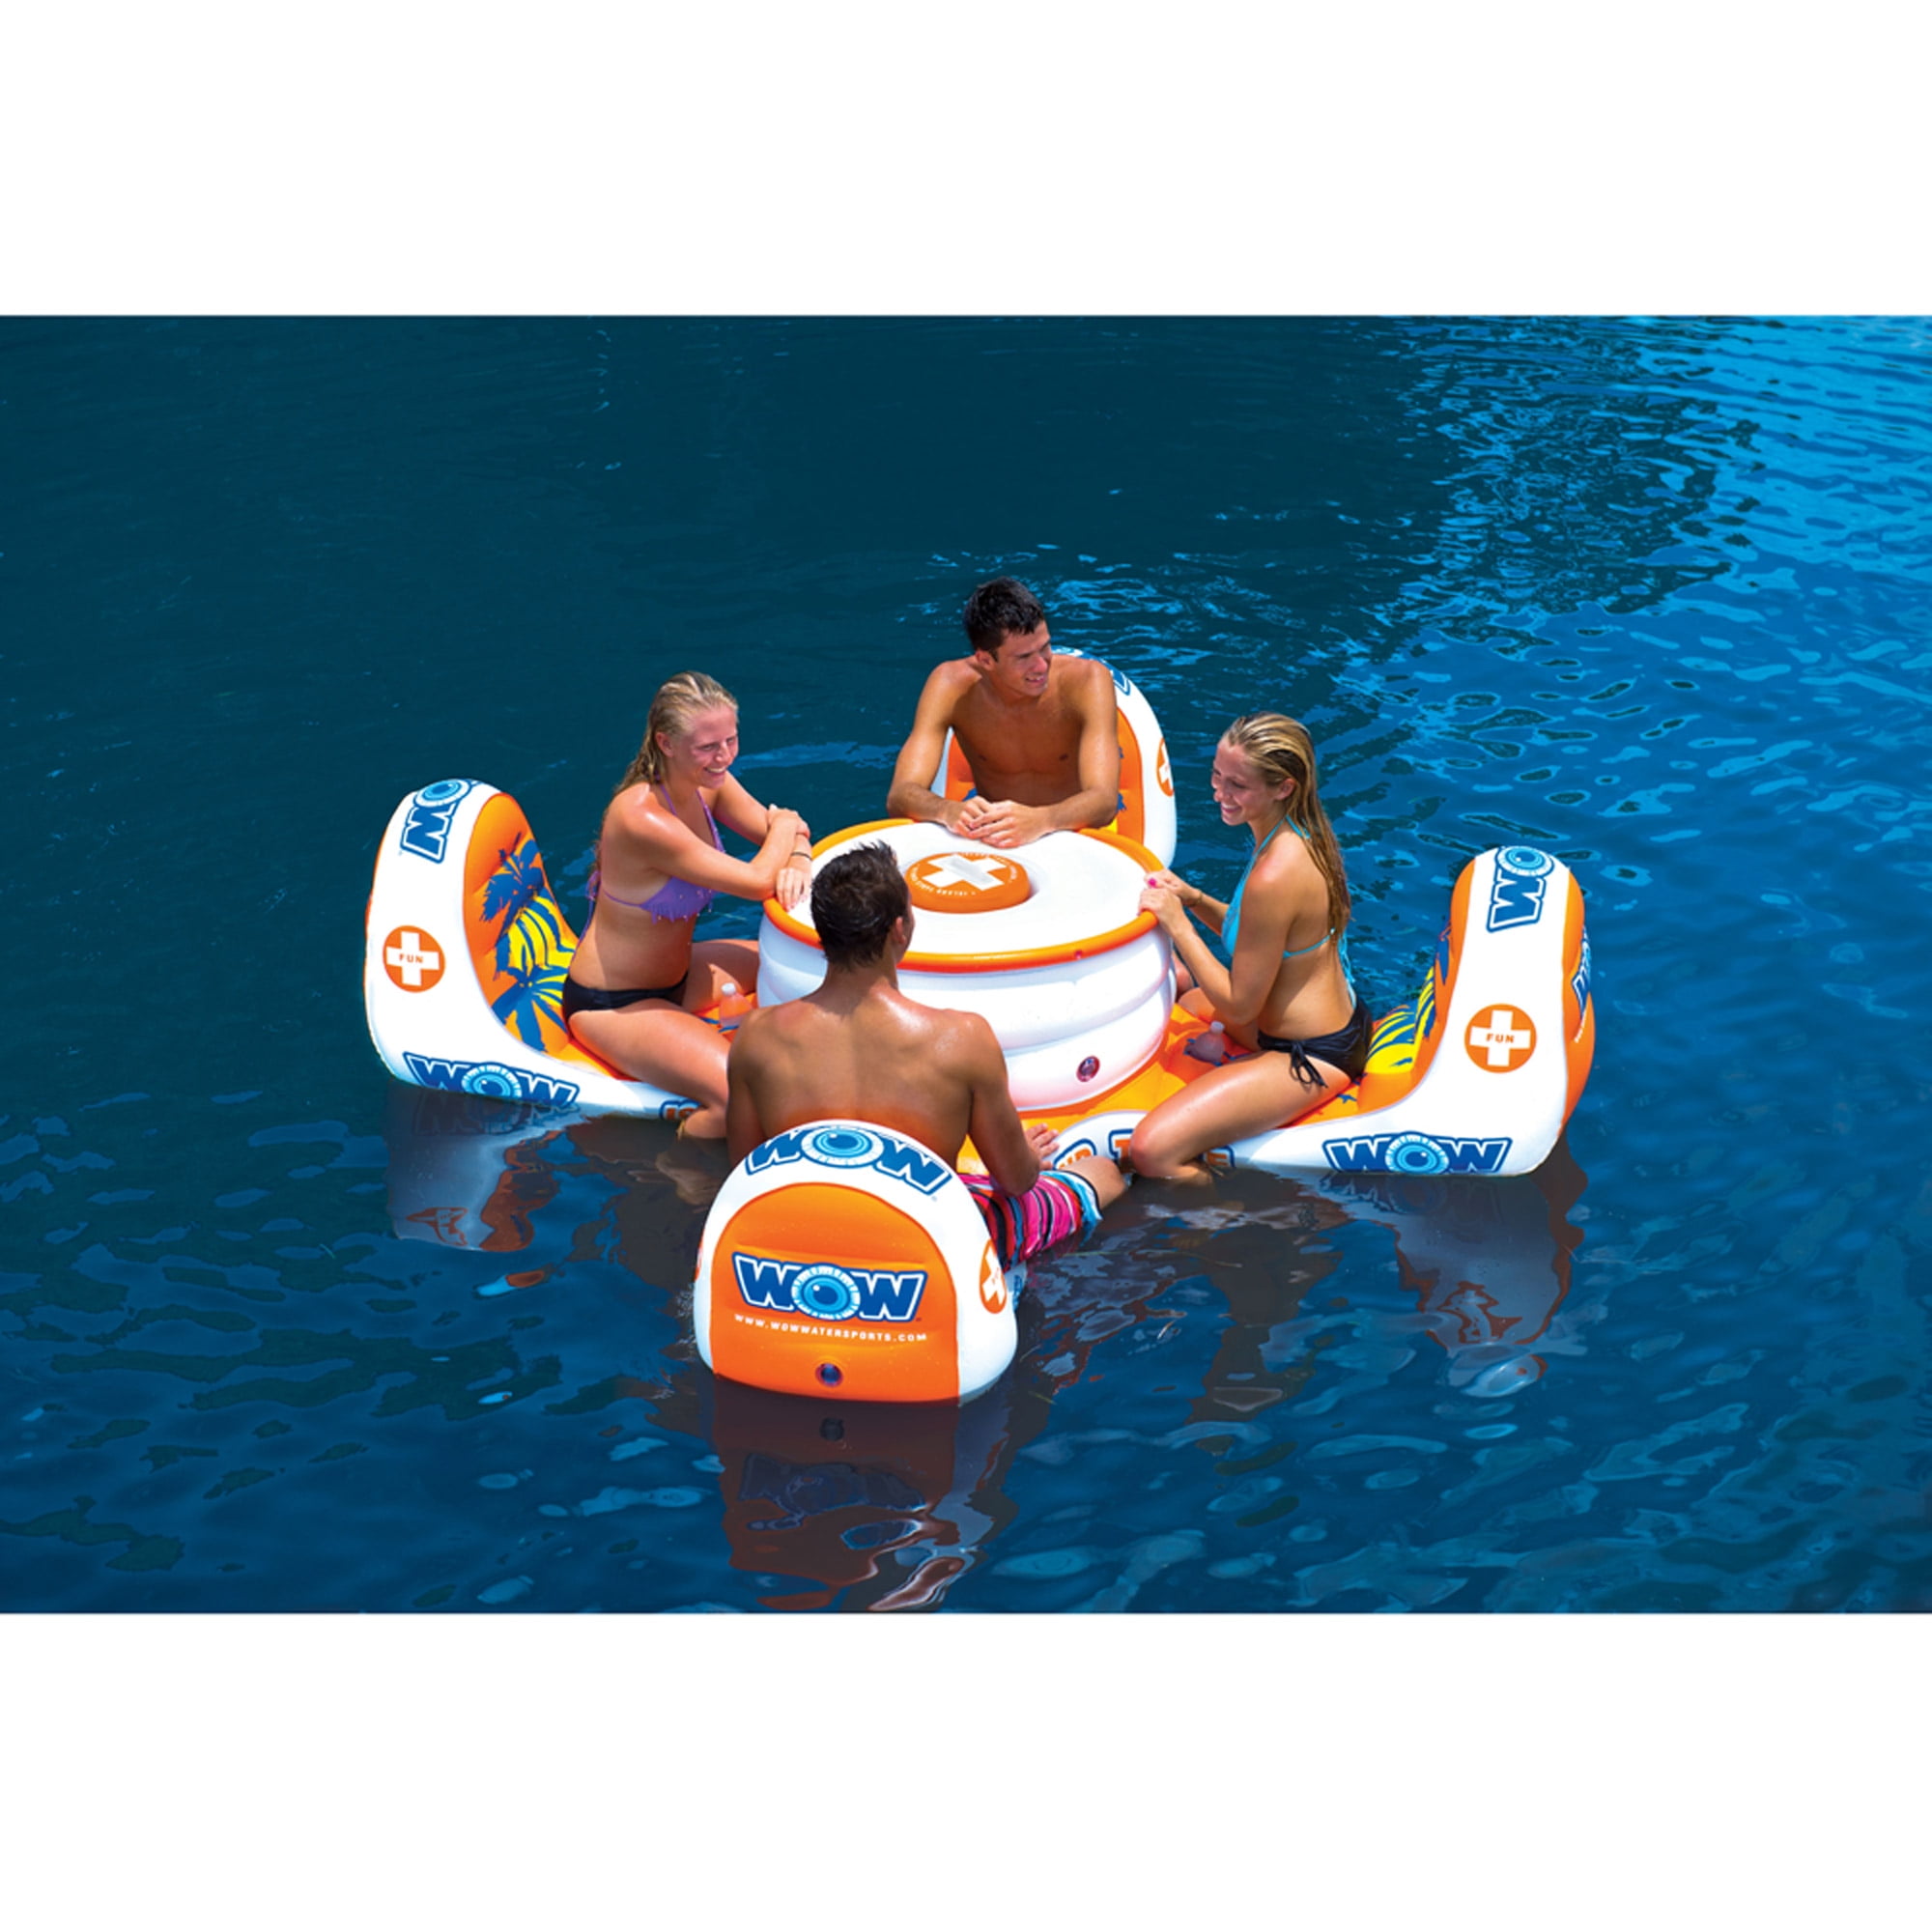 Sportsstuff Cantina 4 Person Pool Lake Lounge w/4 cup holder Inflatable  54-2025 